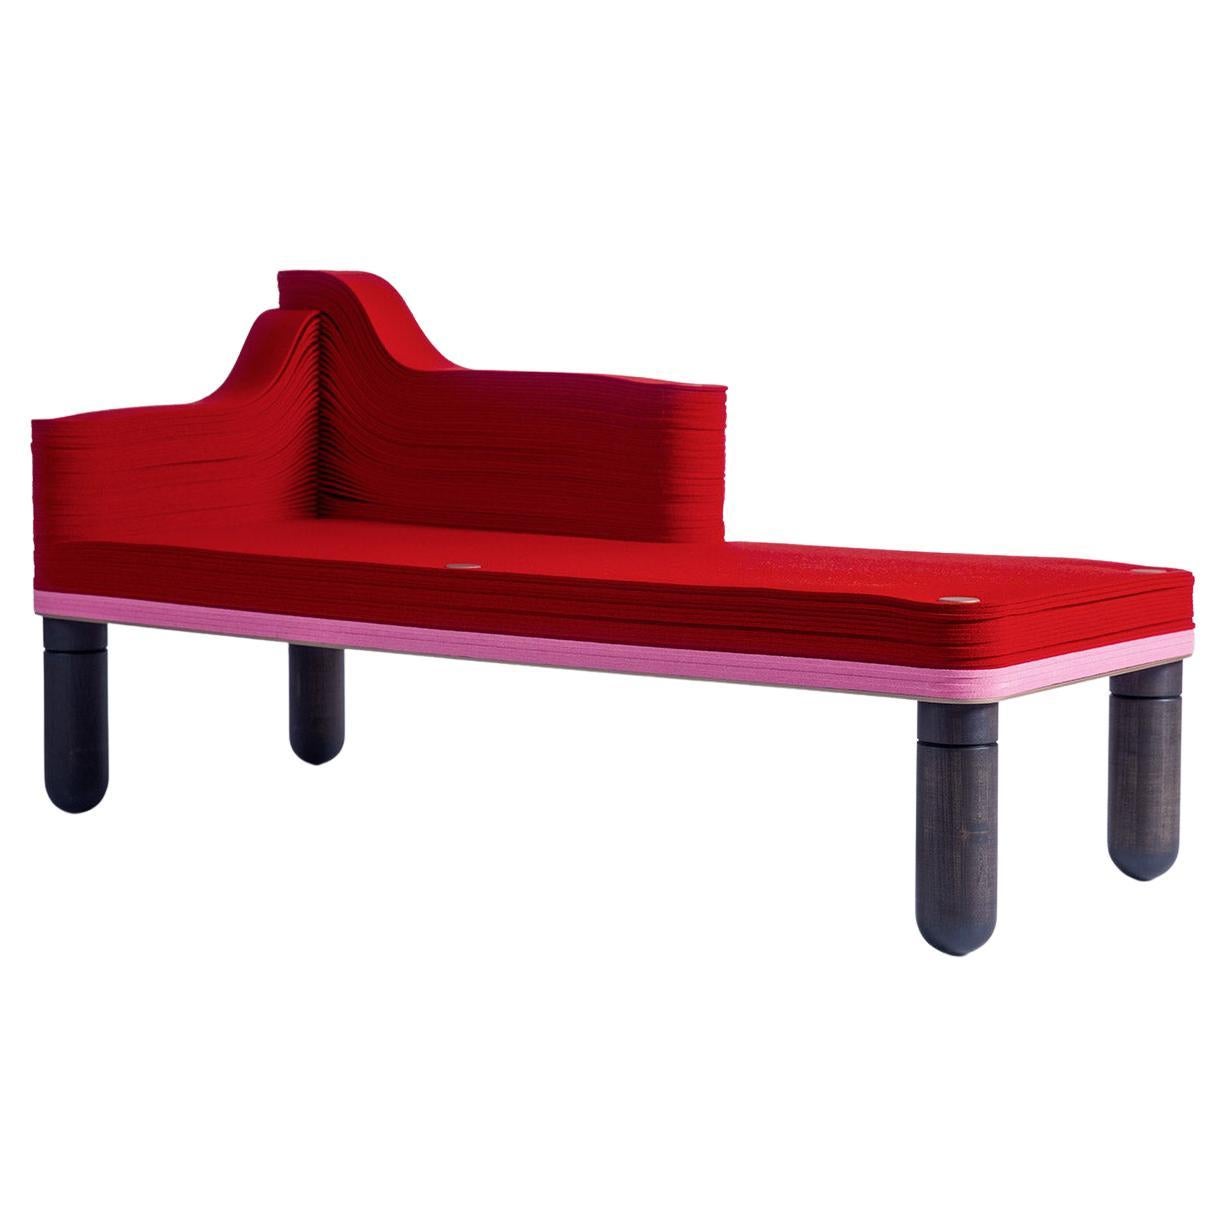 Madame E, Felt and Wood Chaise Lounge, Drake / Anderson in Stackabl